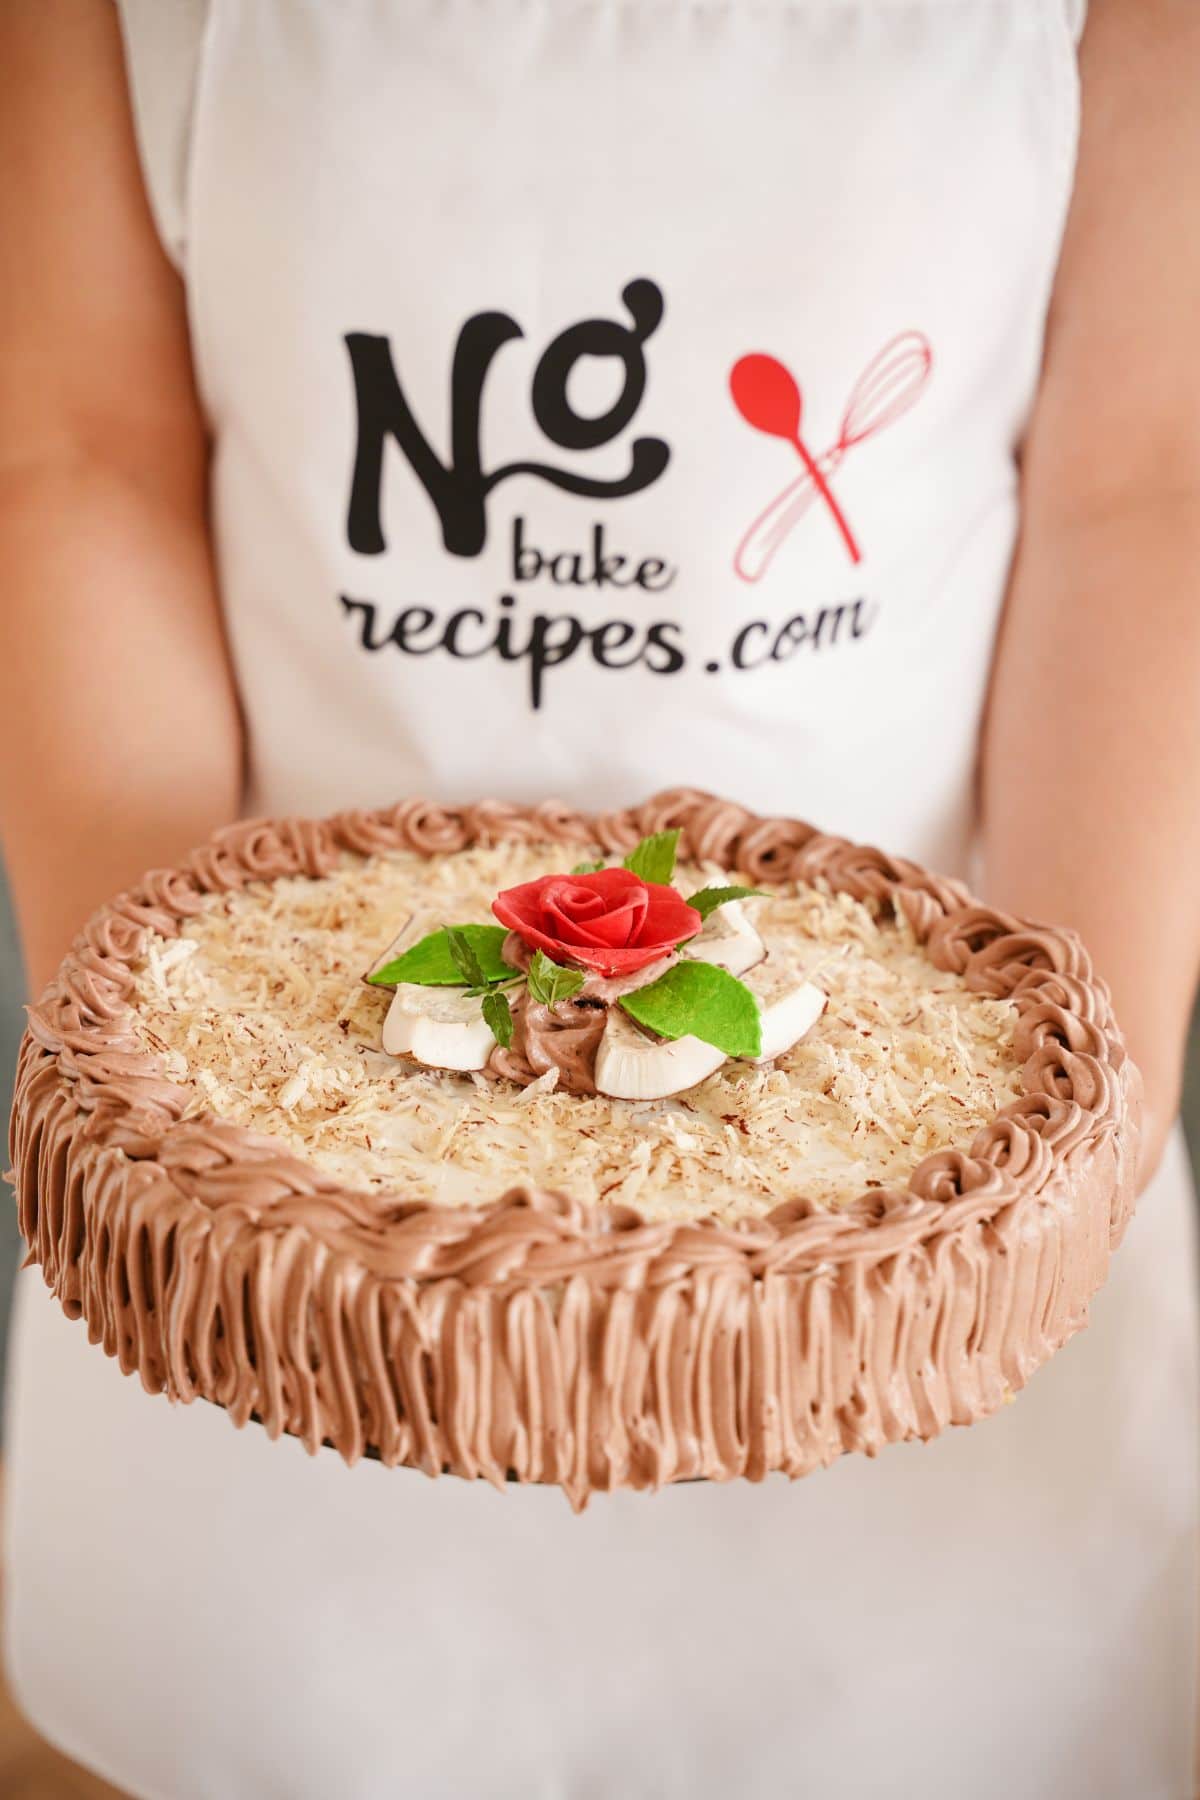 No Bake Banana Coconut Cream Pie served with rose and coconut pieces